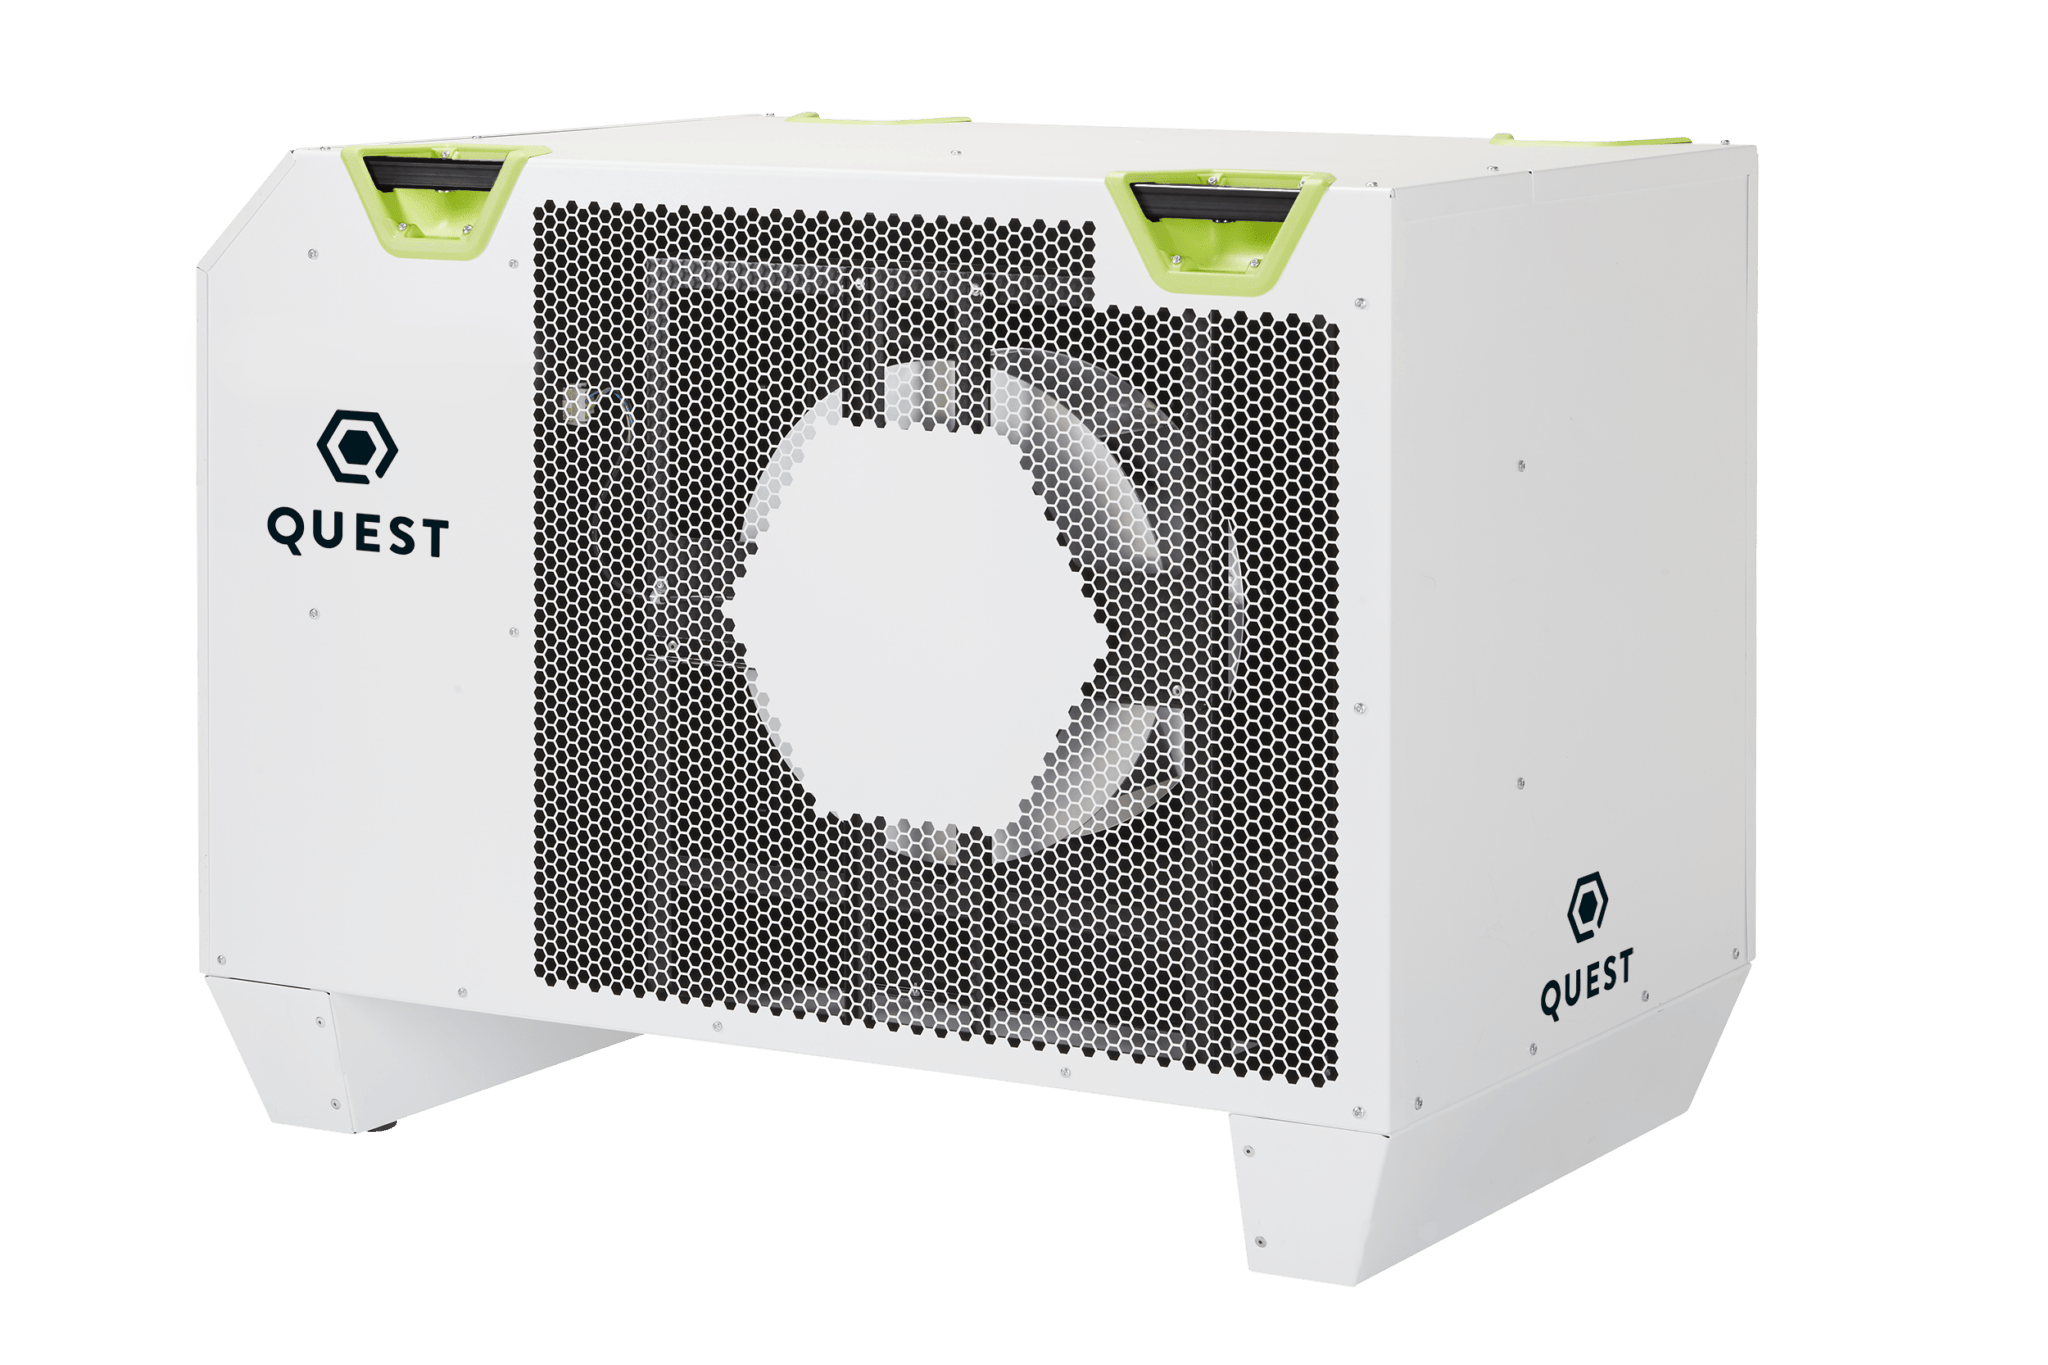 Quest 746 Dehumidifier with green and black handles and a hexagon shaped grill design